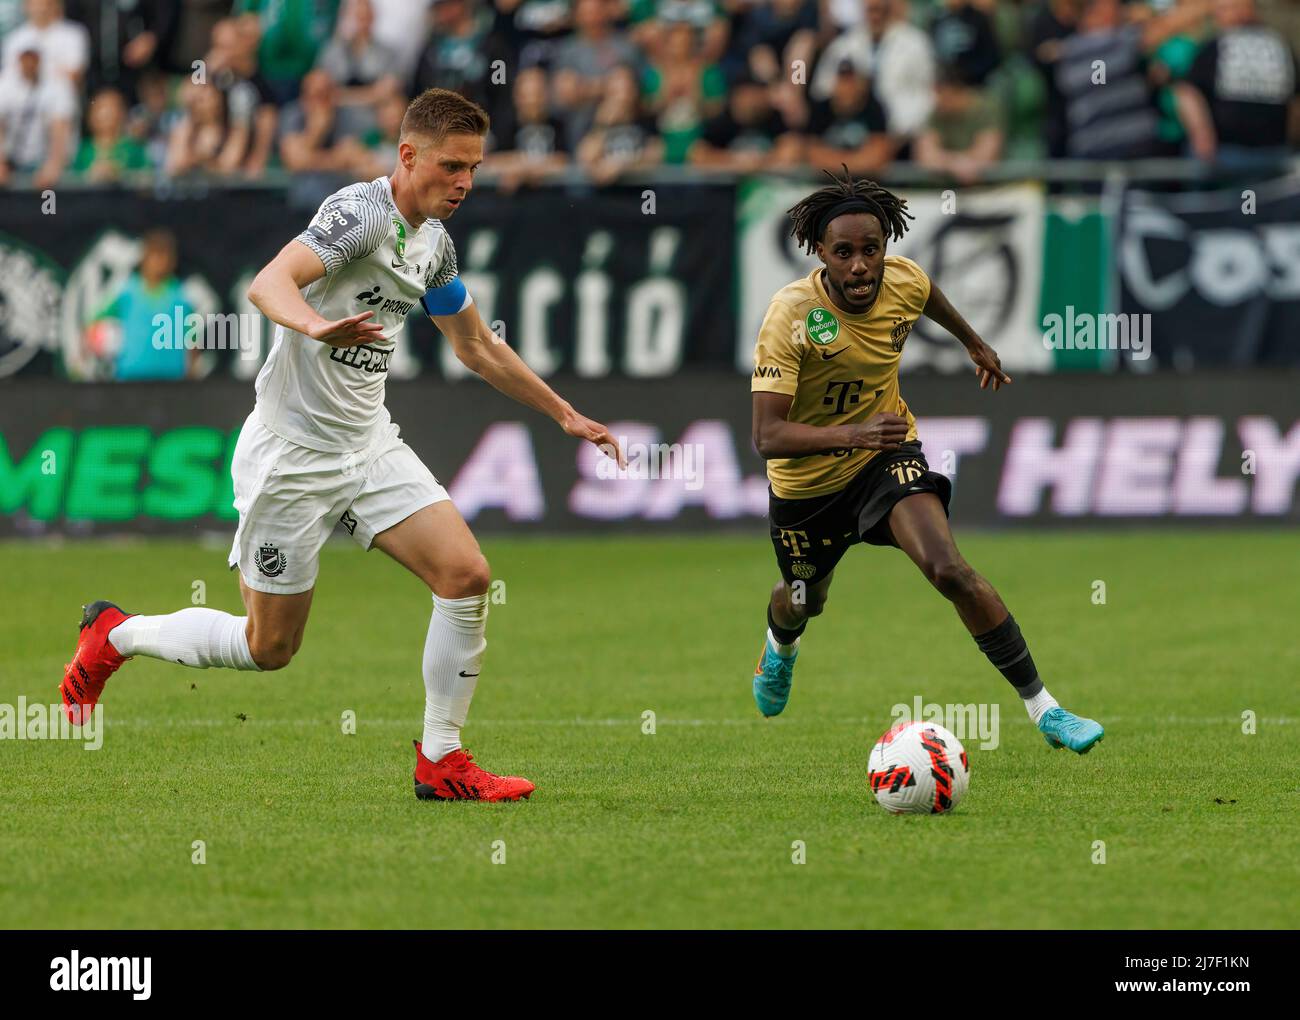 BUDAPEST, HUNGARY - AUGUST 29: (l-r) Tokmac Chol Nguen of Ferencvarosi TC  celebrates his goal in front of Gergo Lovrencsics of Ferencvarosi TC during  the UEFA Europa League Play-off Second Leg match